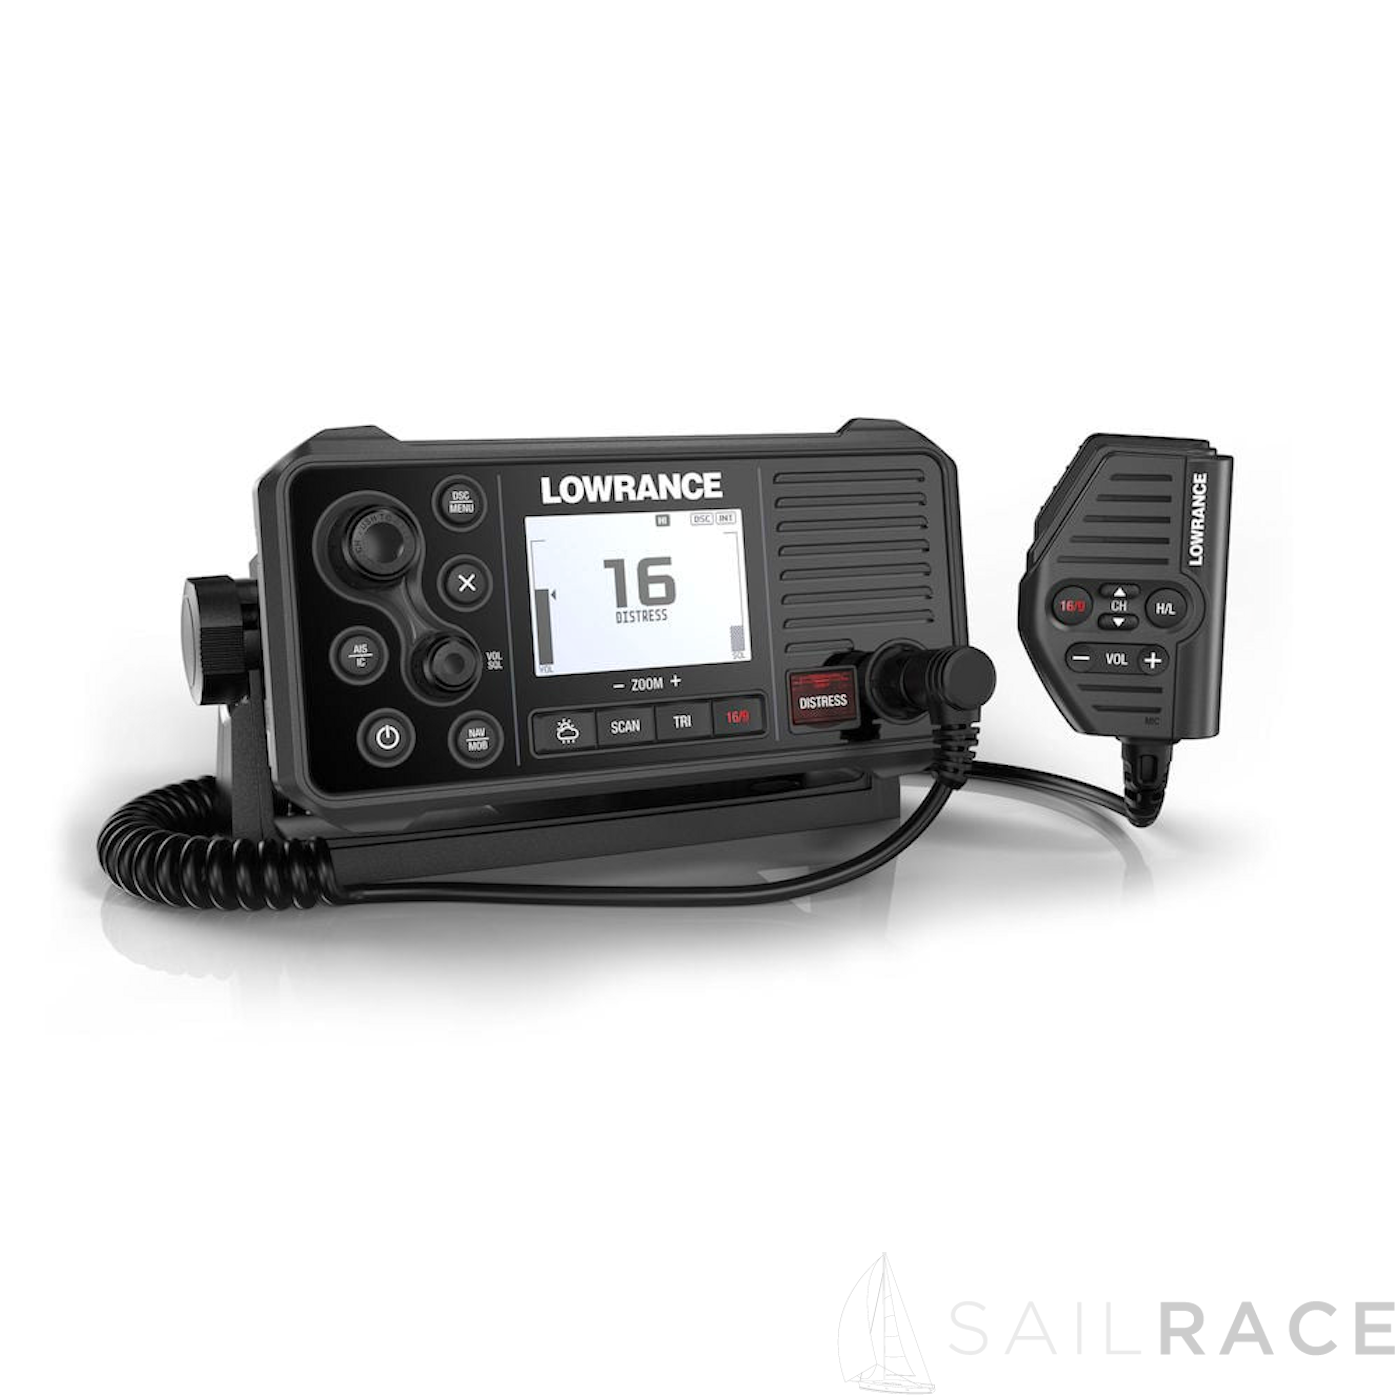 Lowrance LINK-9 Marine VHF Radio with DSC and AIS Receive